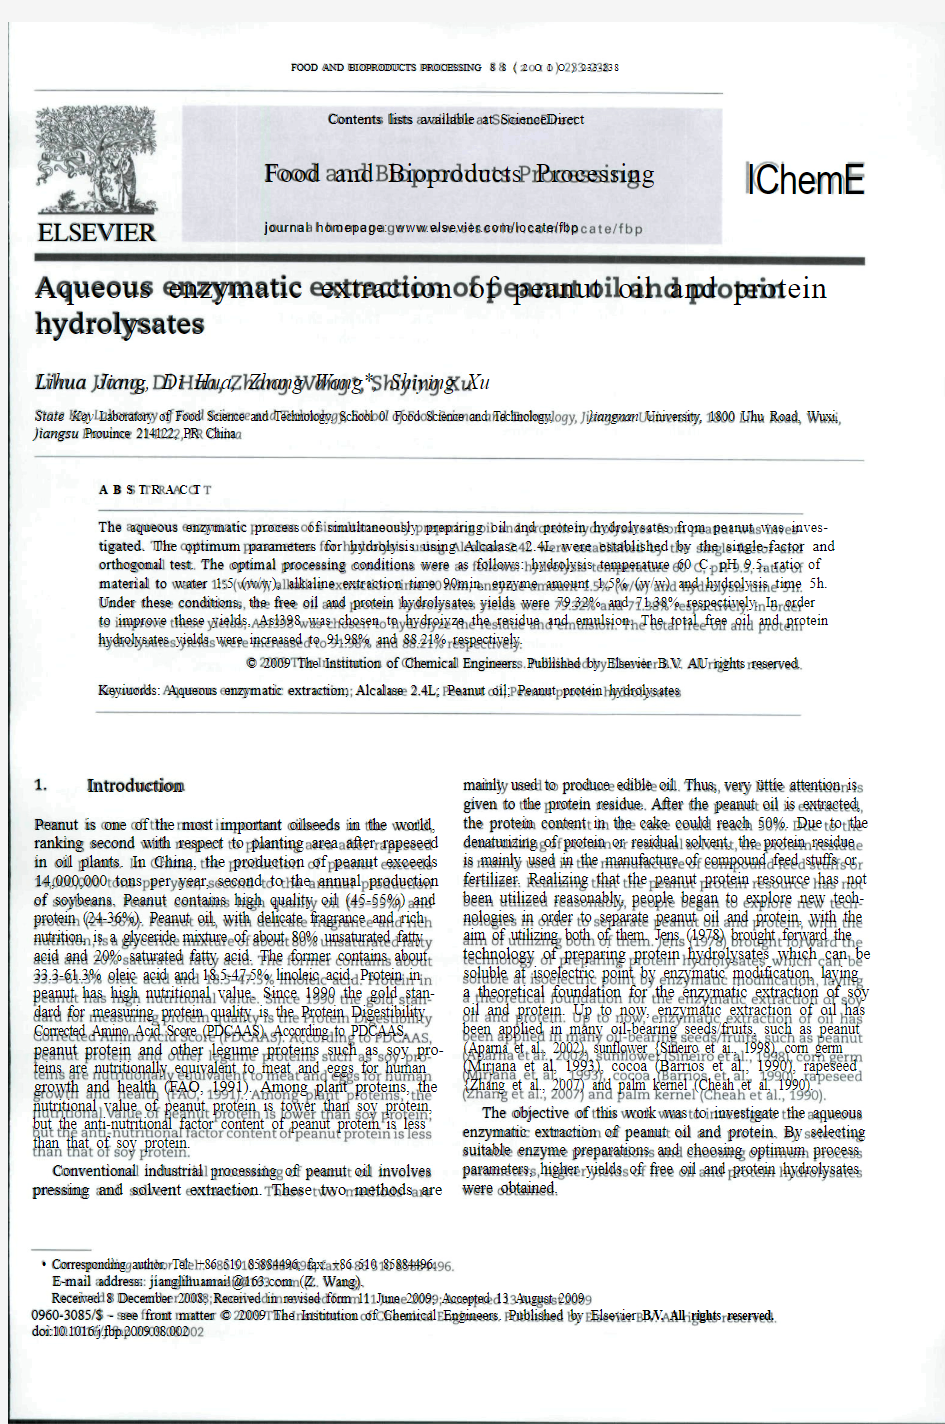 Aqueous_enzymatic_extraction_of_peanut_oil_and_protein_hydrolysates.1